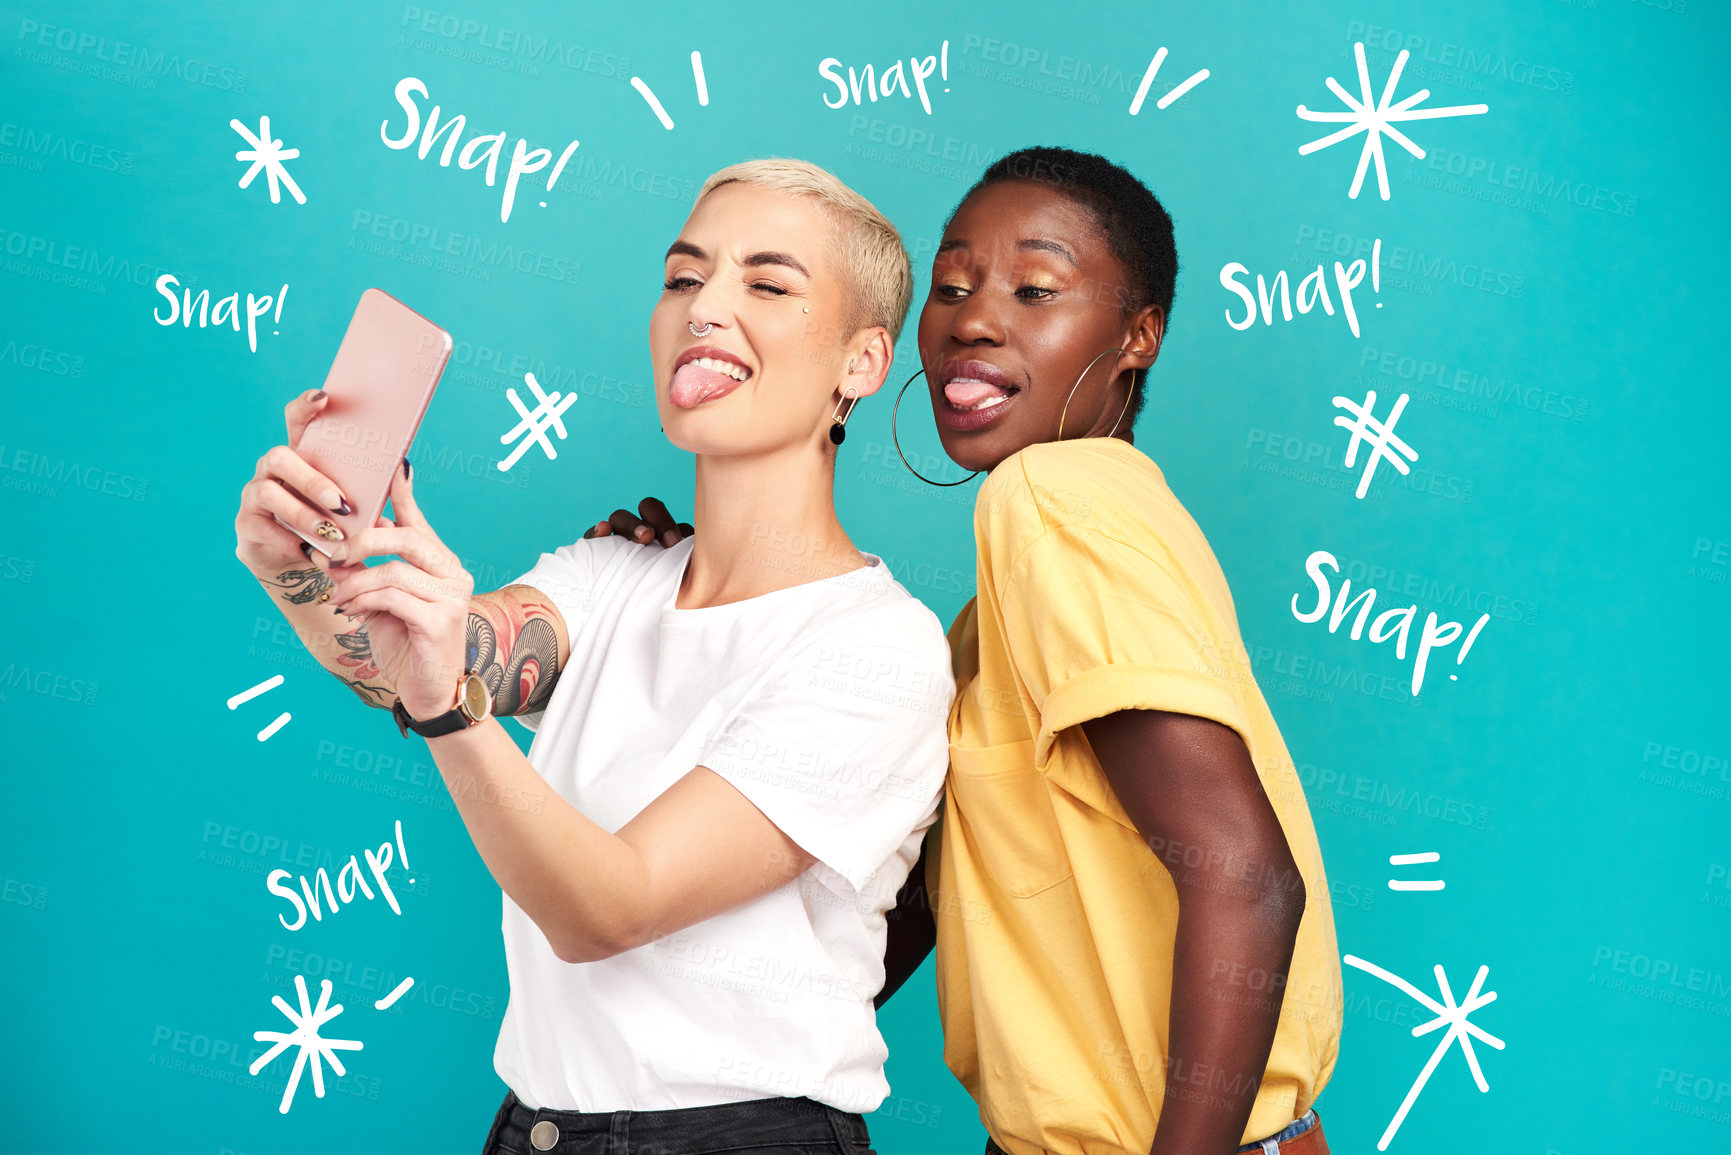 Buy stock photo Studio shot of two young women taking selfies together against a turquoise background